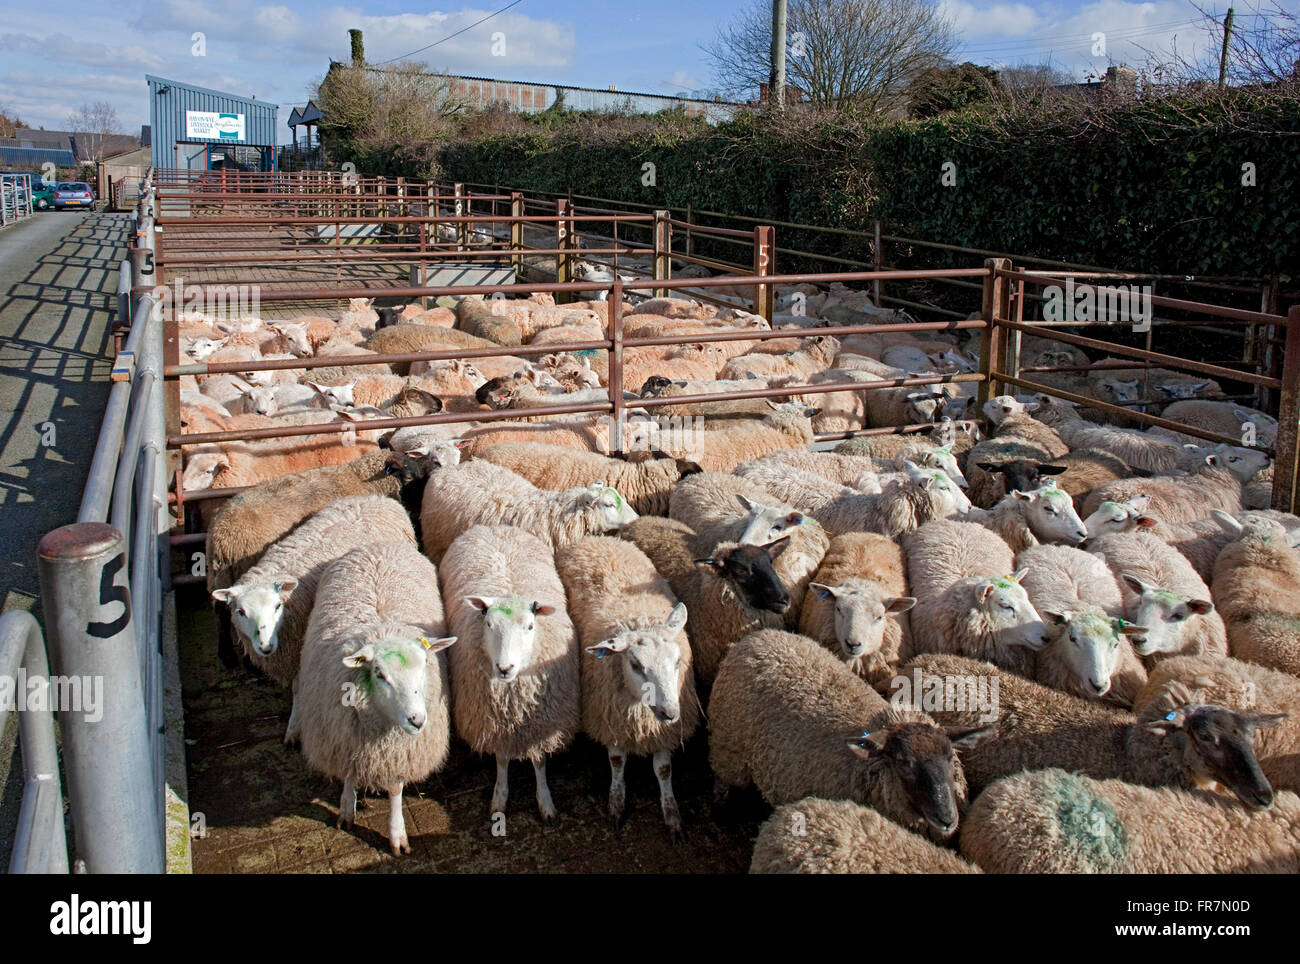 Sheep in a market in Powys Wales Stock Photo